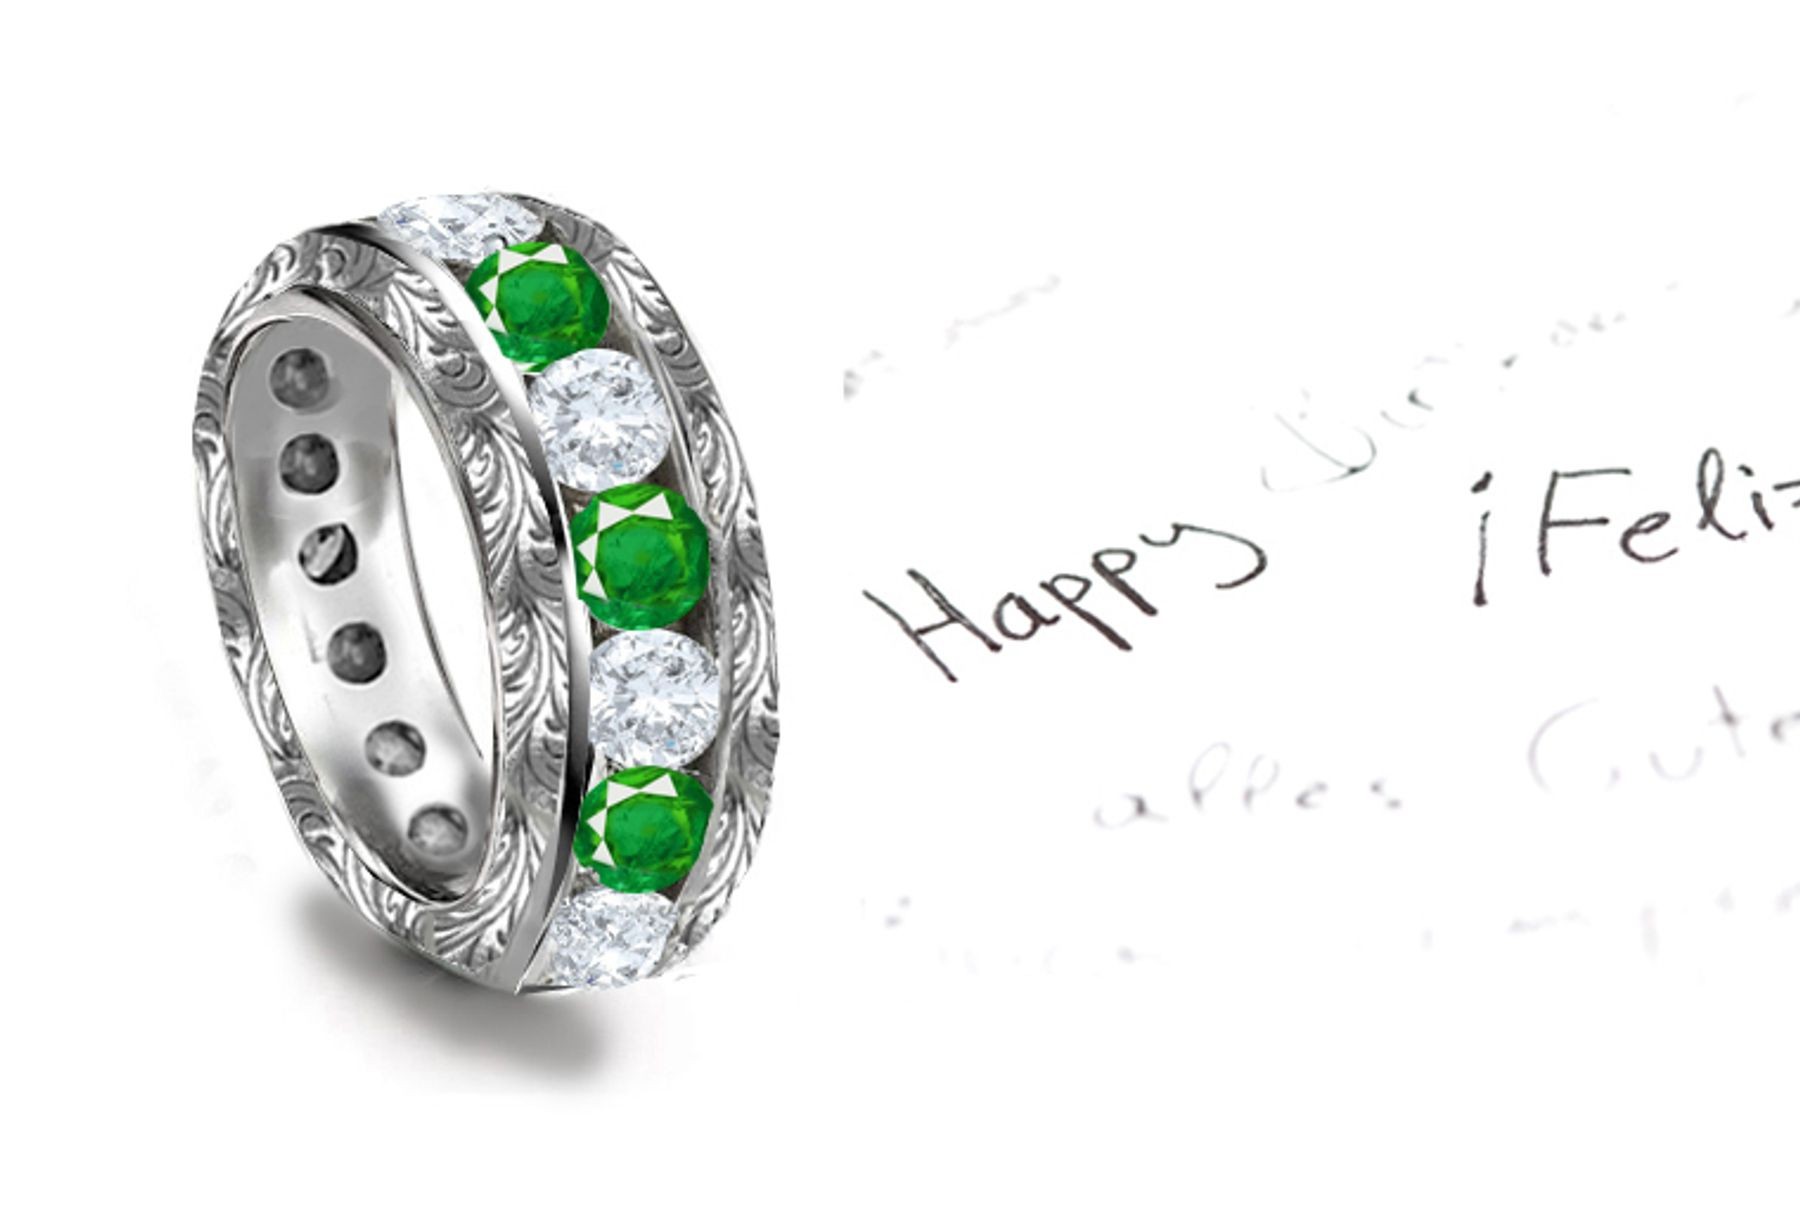 IN CURRENT STOCK: Everyday Wear Stylistic 14k Gold Diamonds & Emeralds Gleaming Embossed RinG in Range of Pricesg